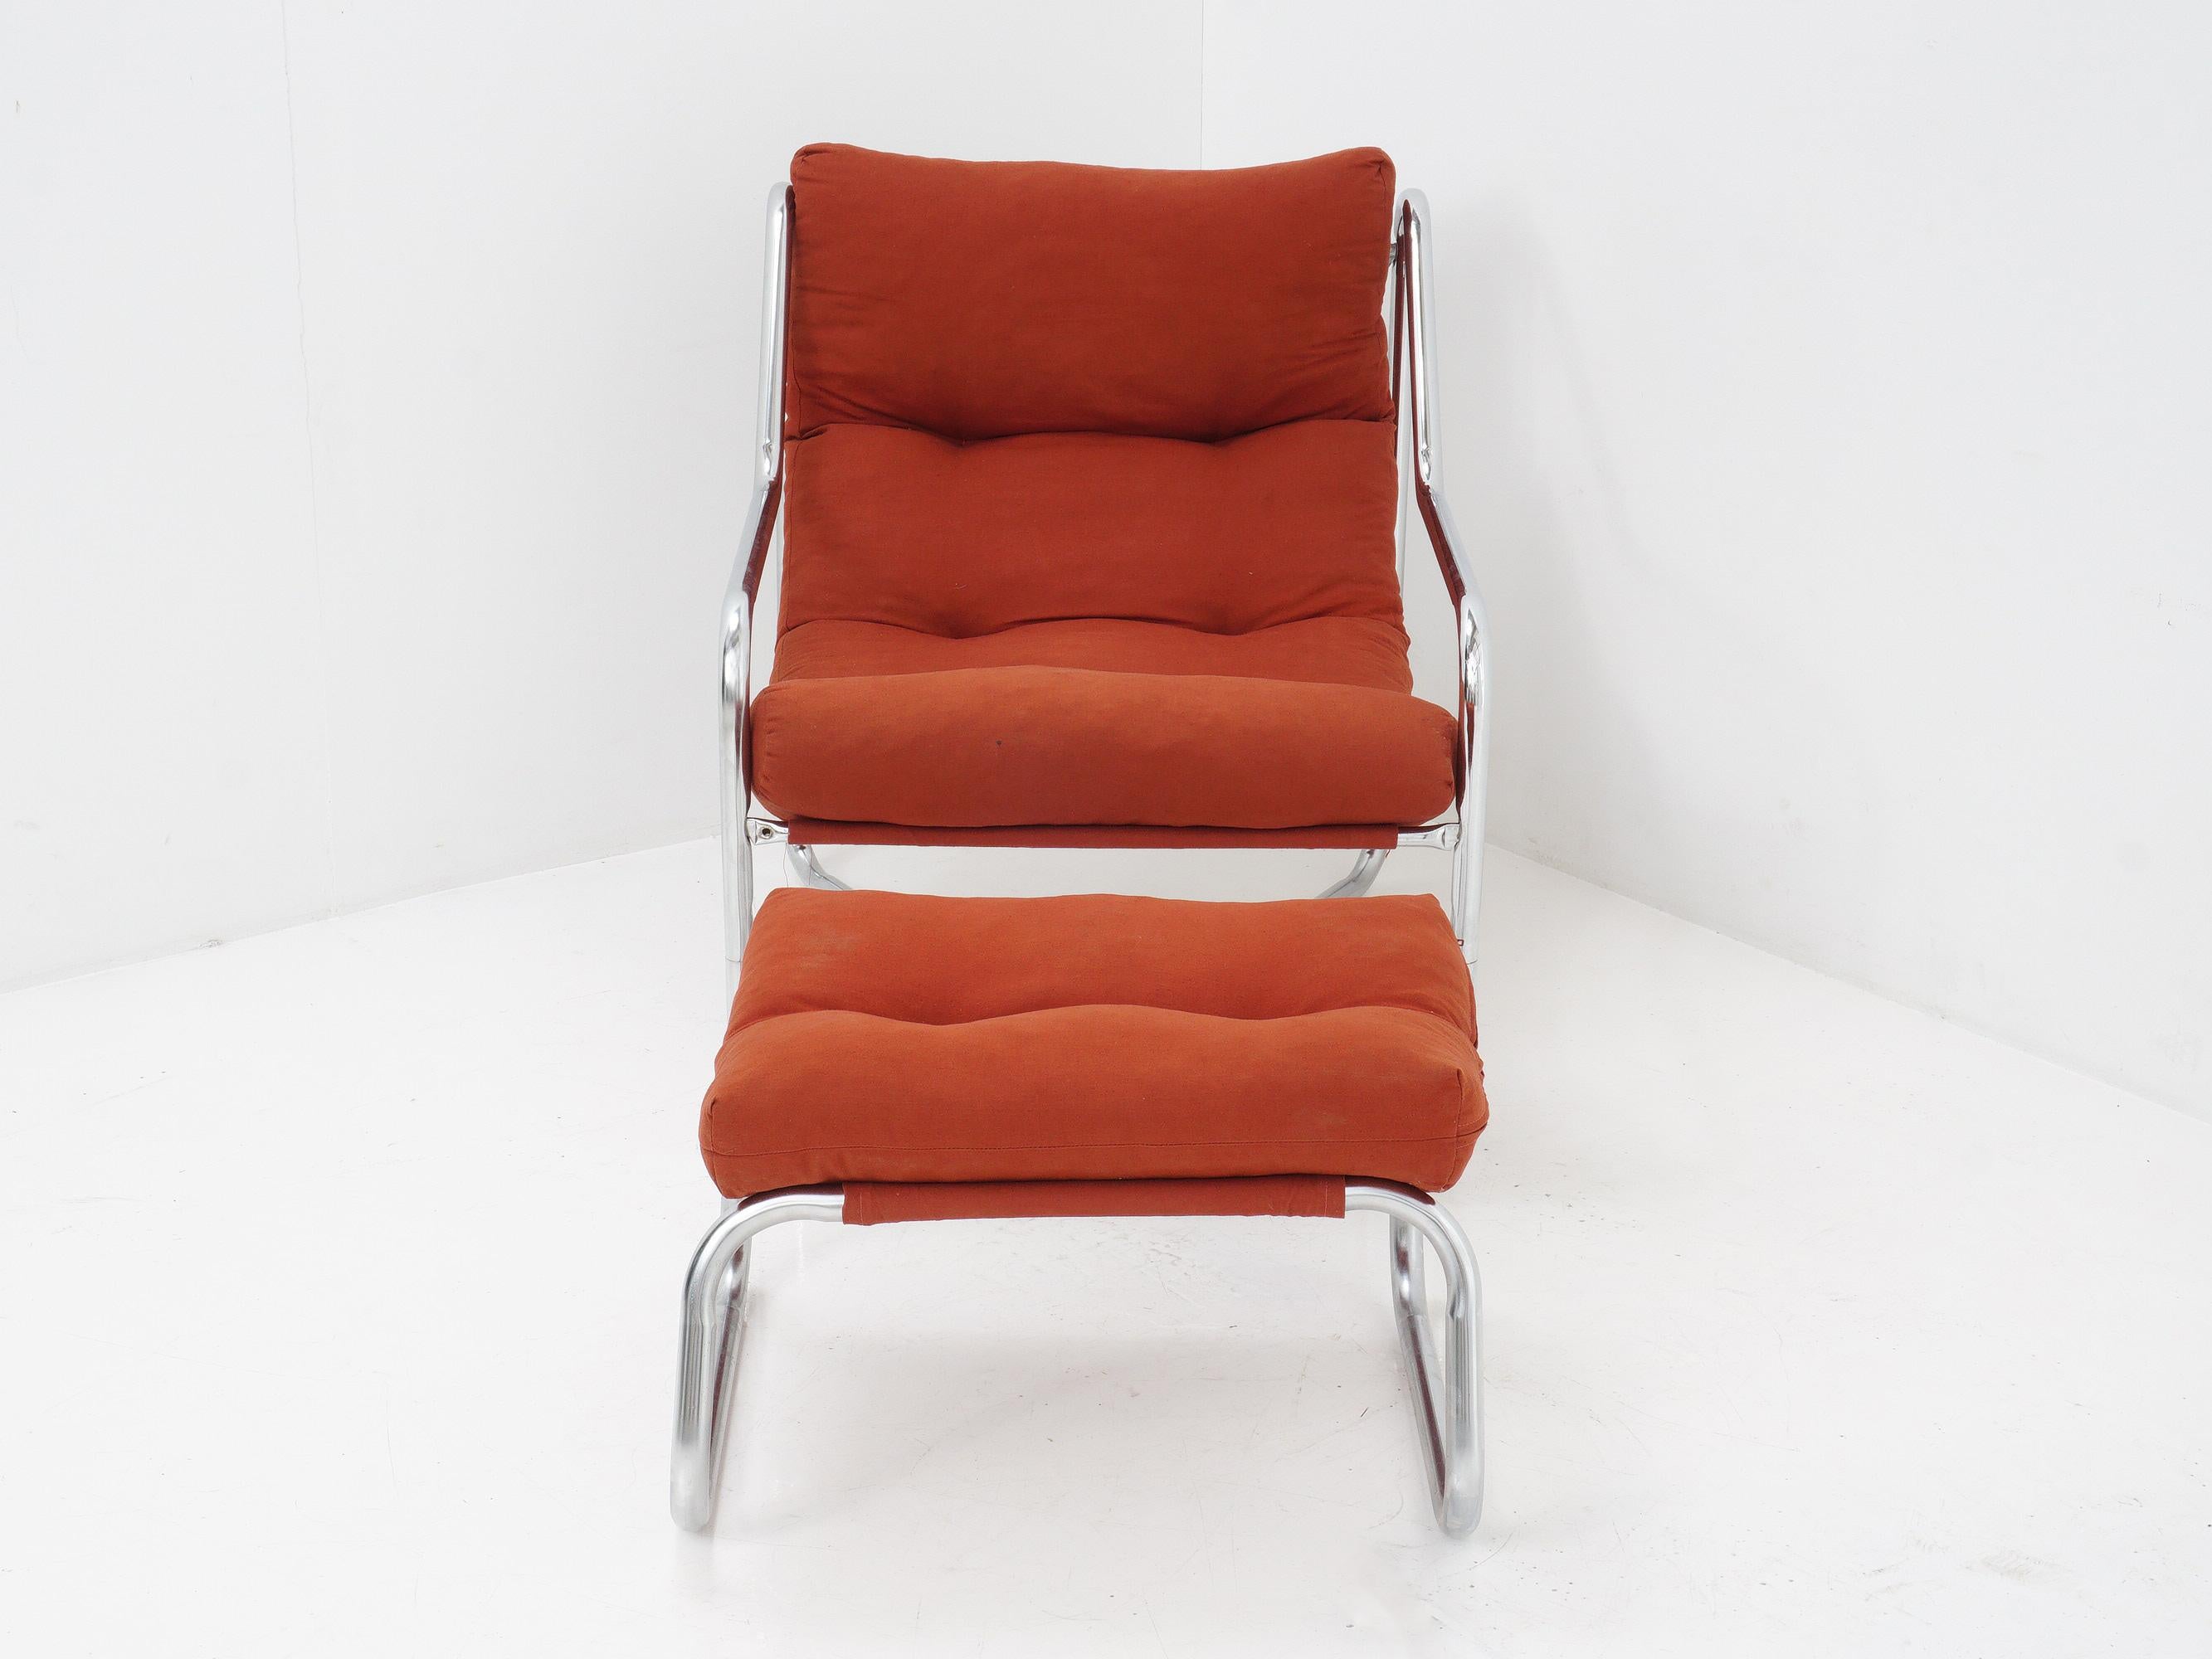 Add a pop of color to your space with this rust-red lounge chair and ottoman. The tubular chrome frame gives it a retro edge that's perfect for any mid-century modern enthusiast.

- 27.5